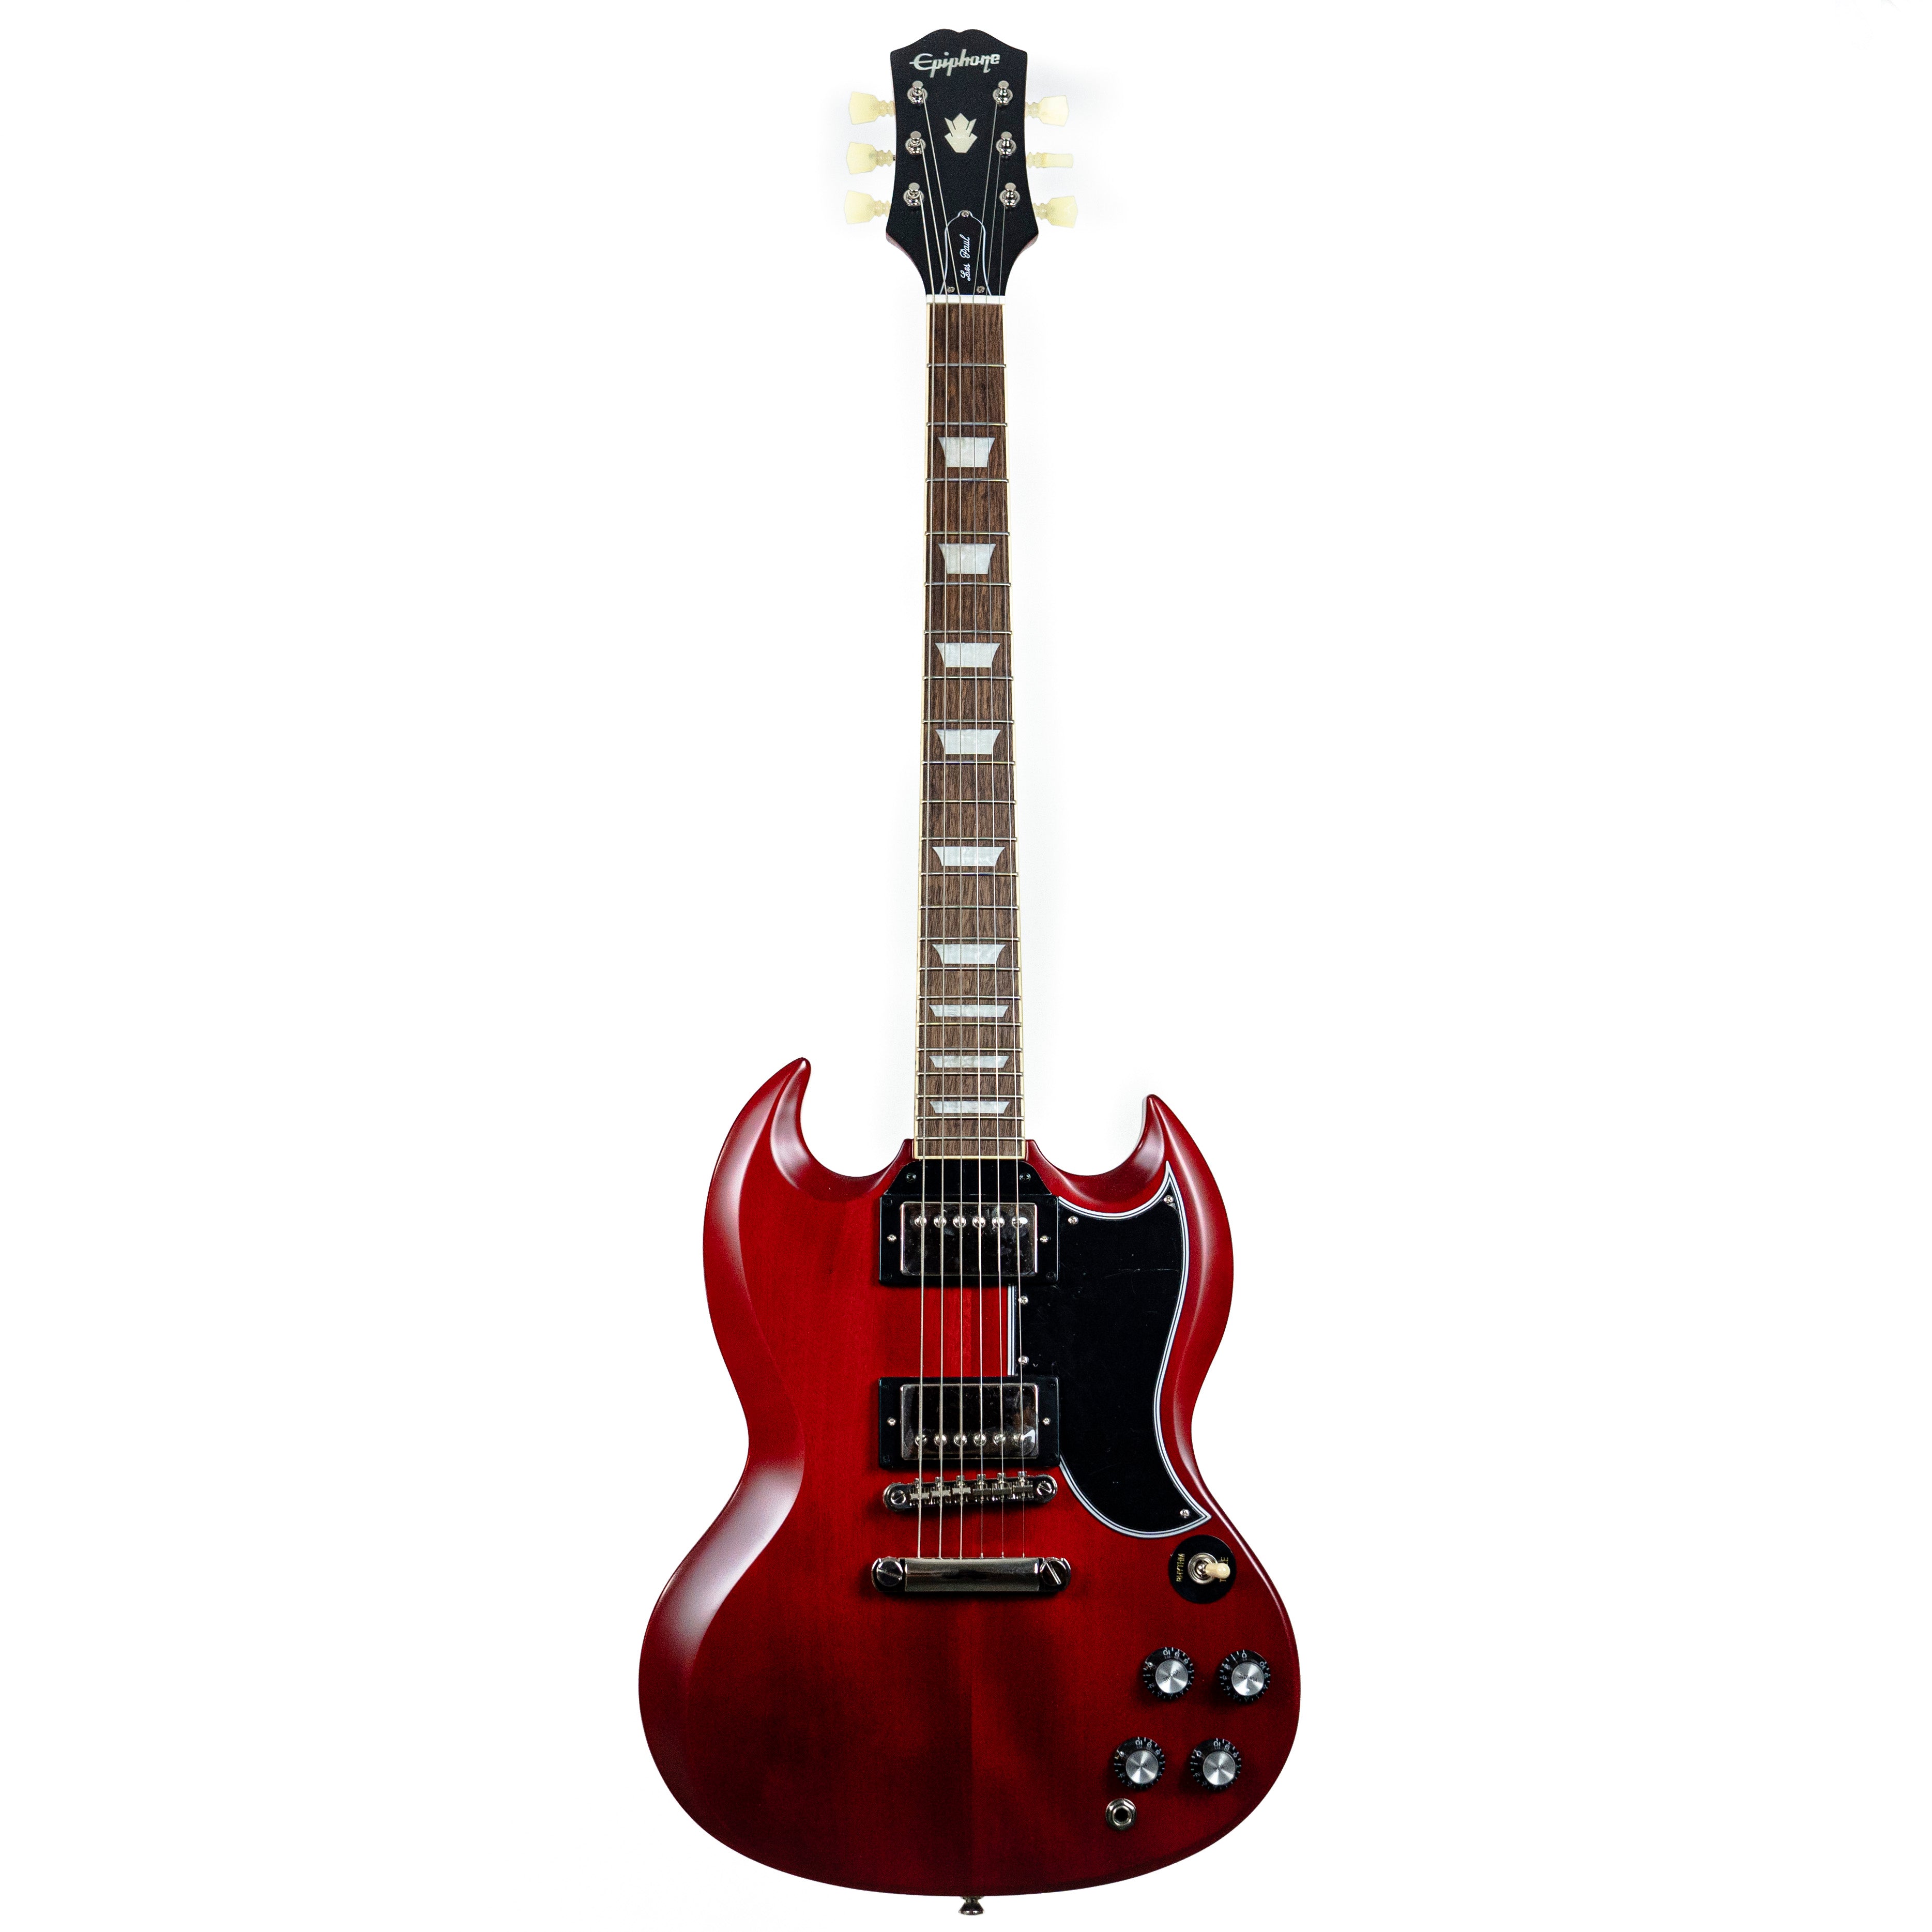 Epiphone 1961 Les Paul Sg Standard (Aged Sixties Cherry)